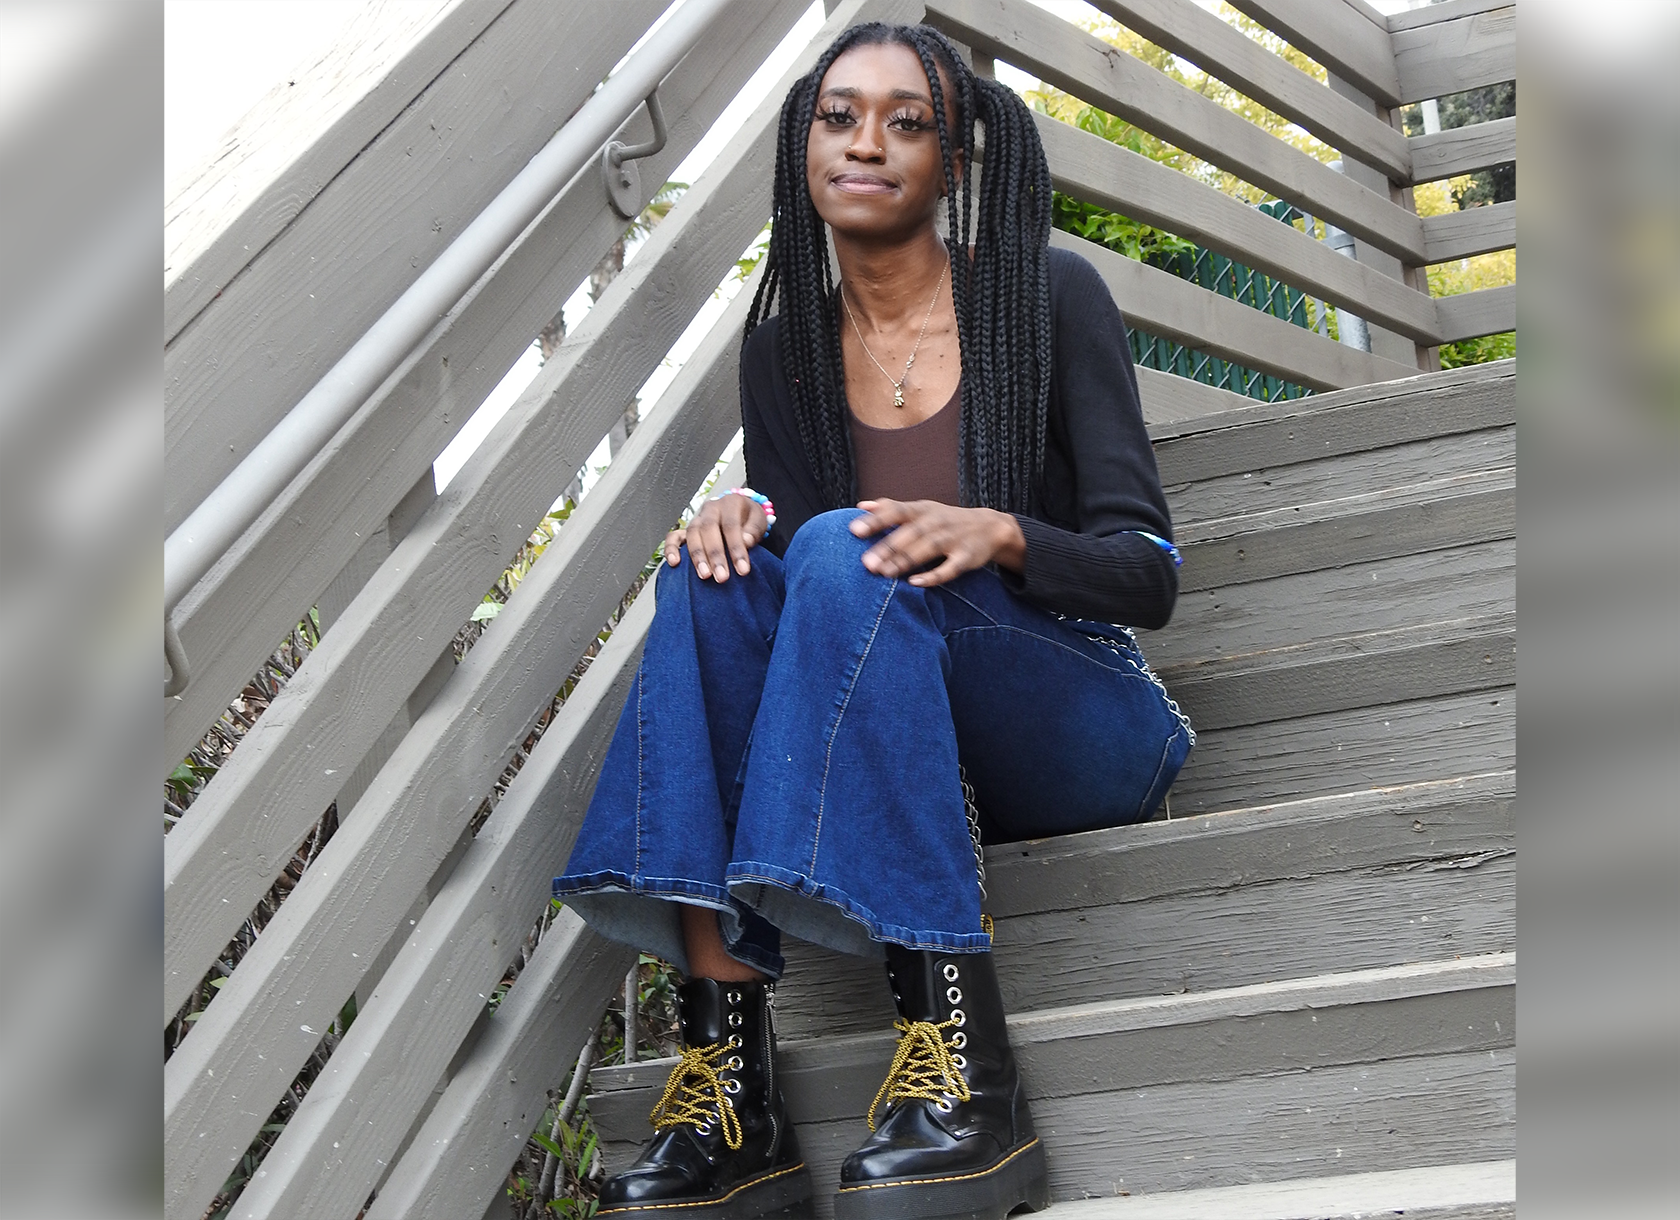 Photograph of Kushnerniva Laurent '24, a Black woman with long hair, wearing jeans and sitting on wooden stairs.